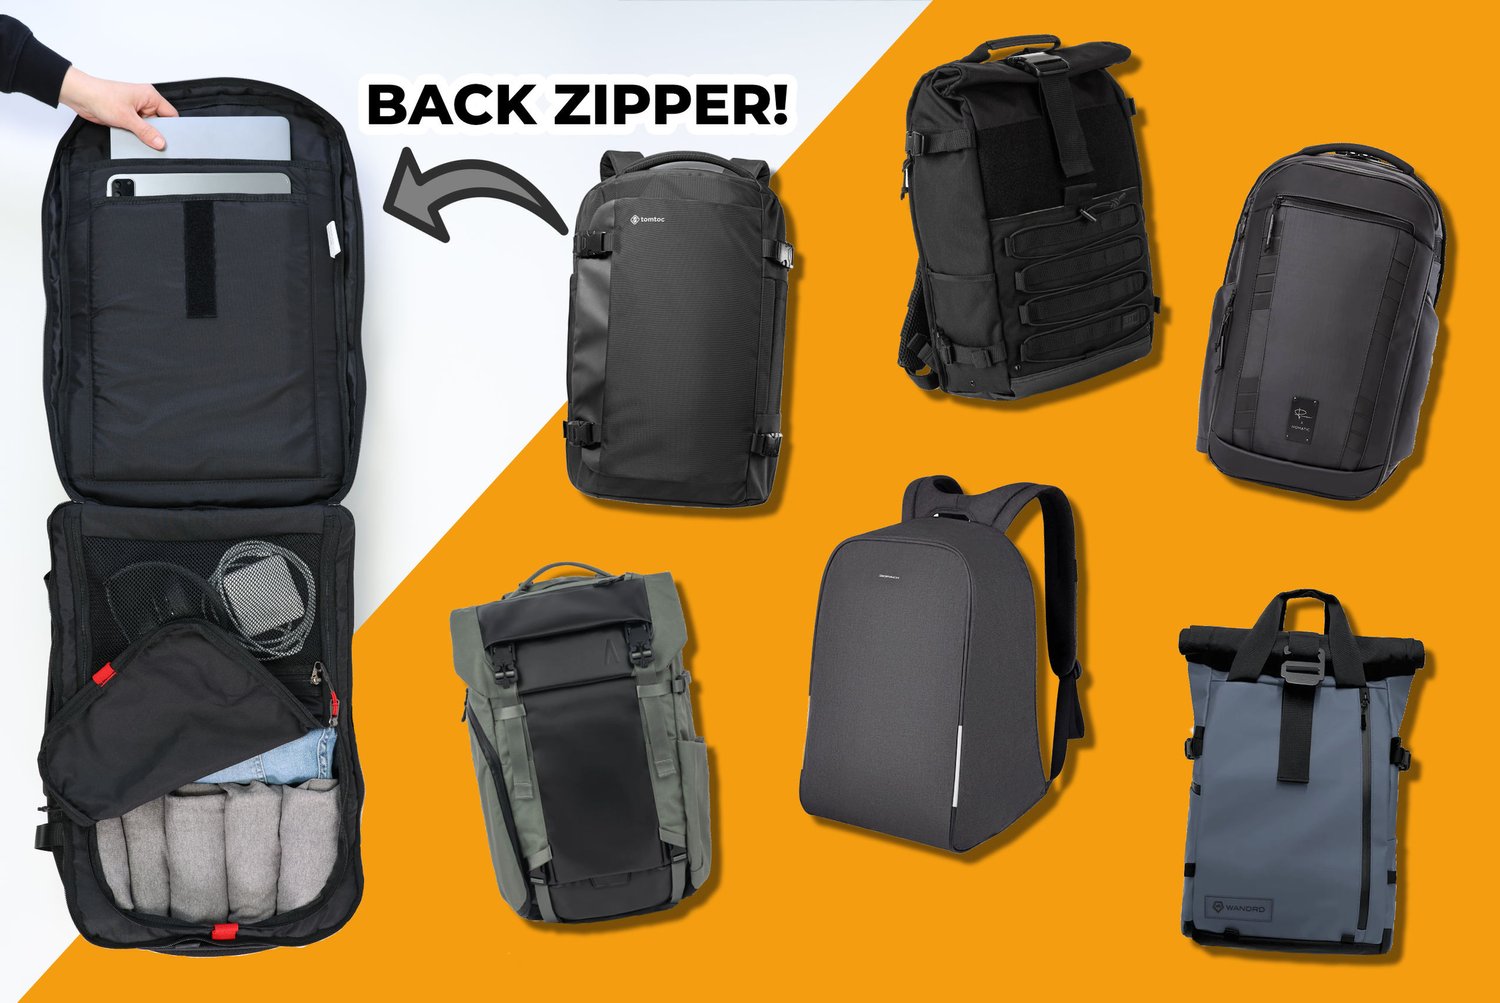 What's your favorite way to keep zippers secure while in crowded